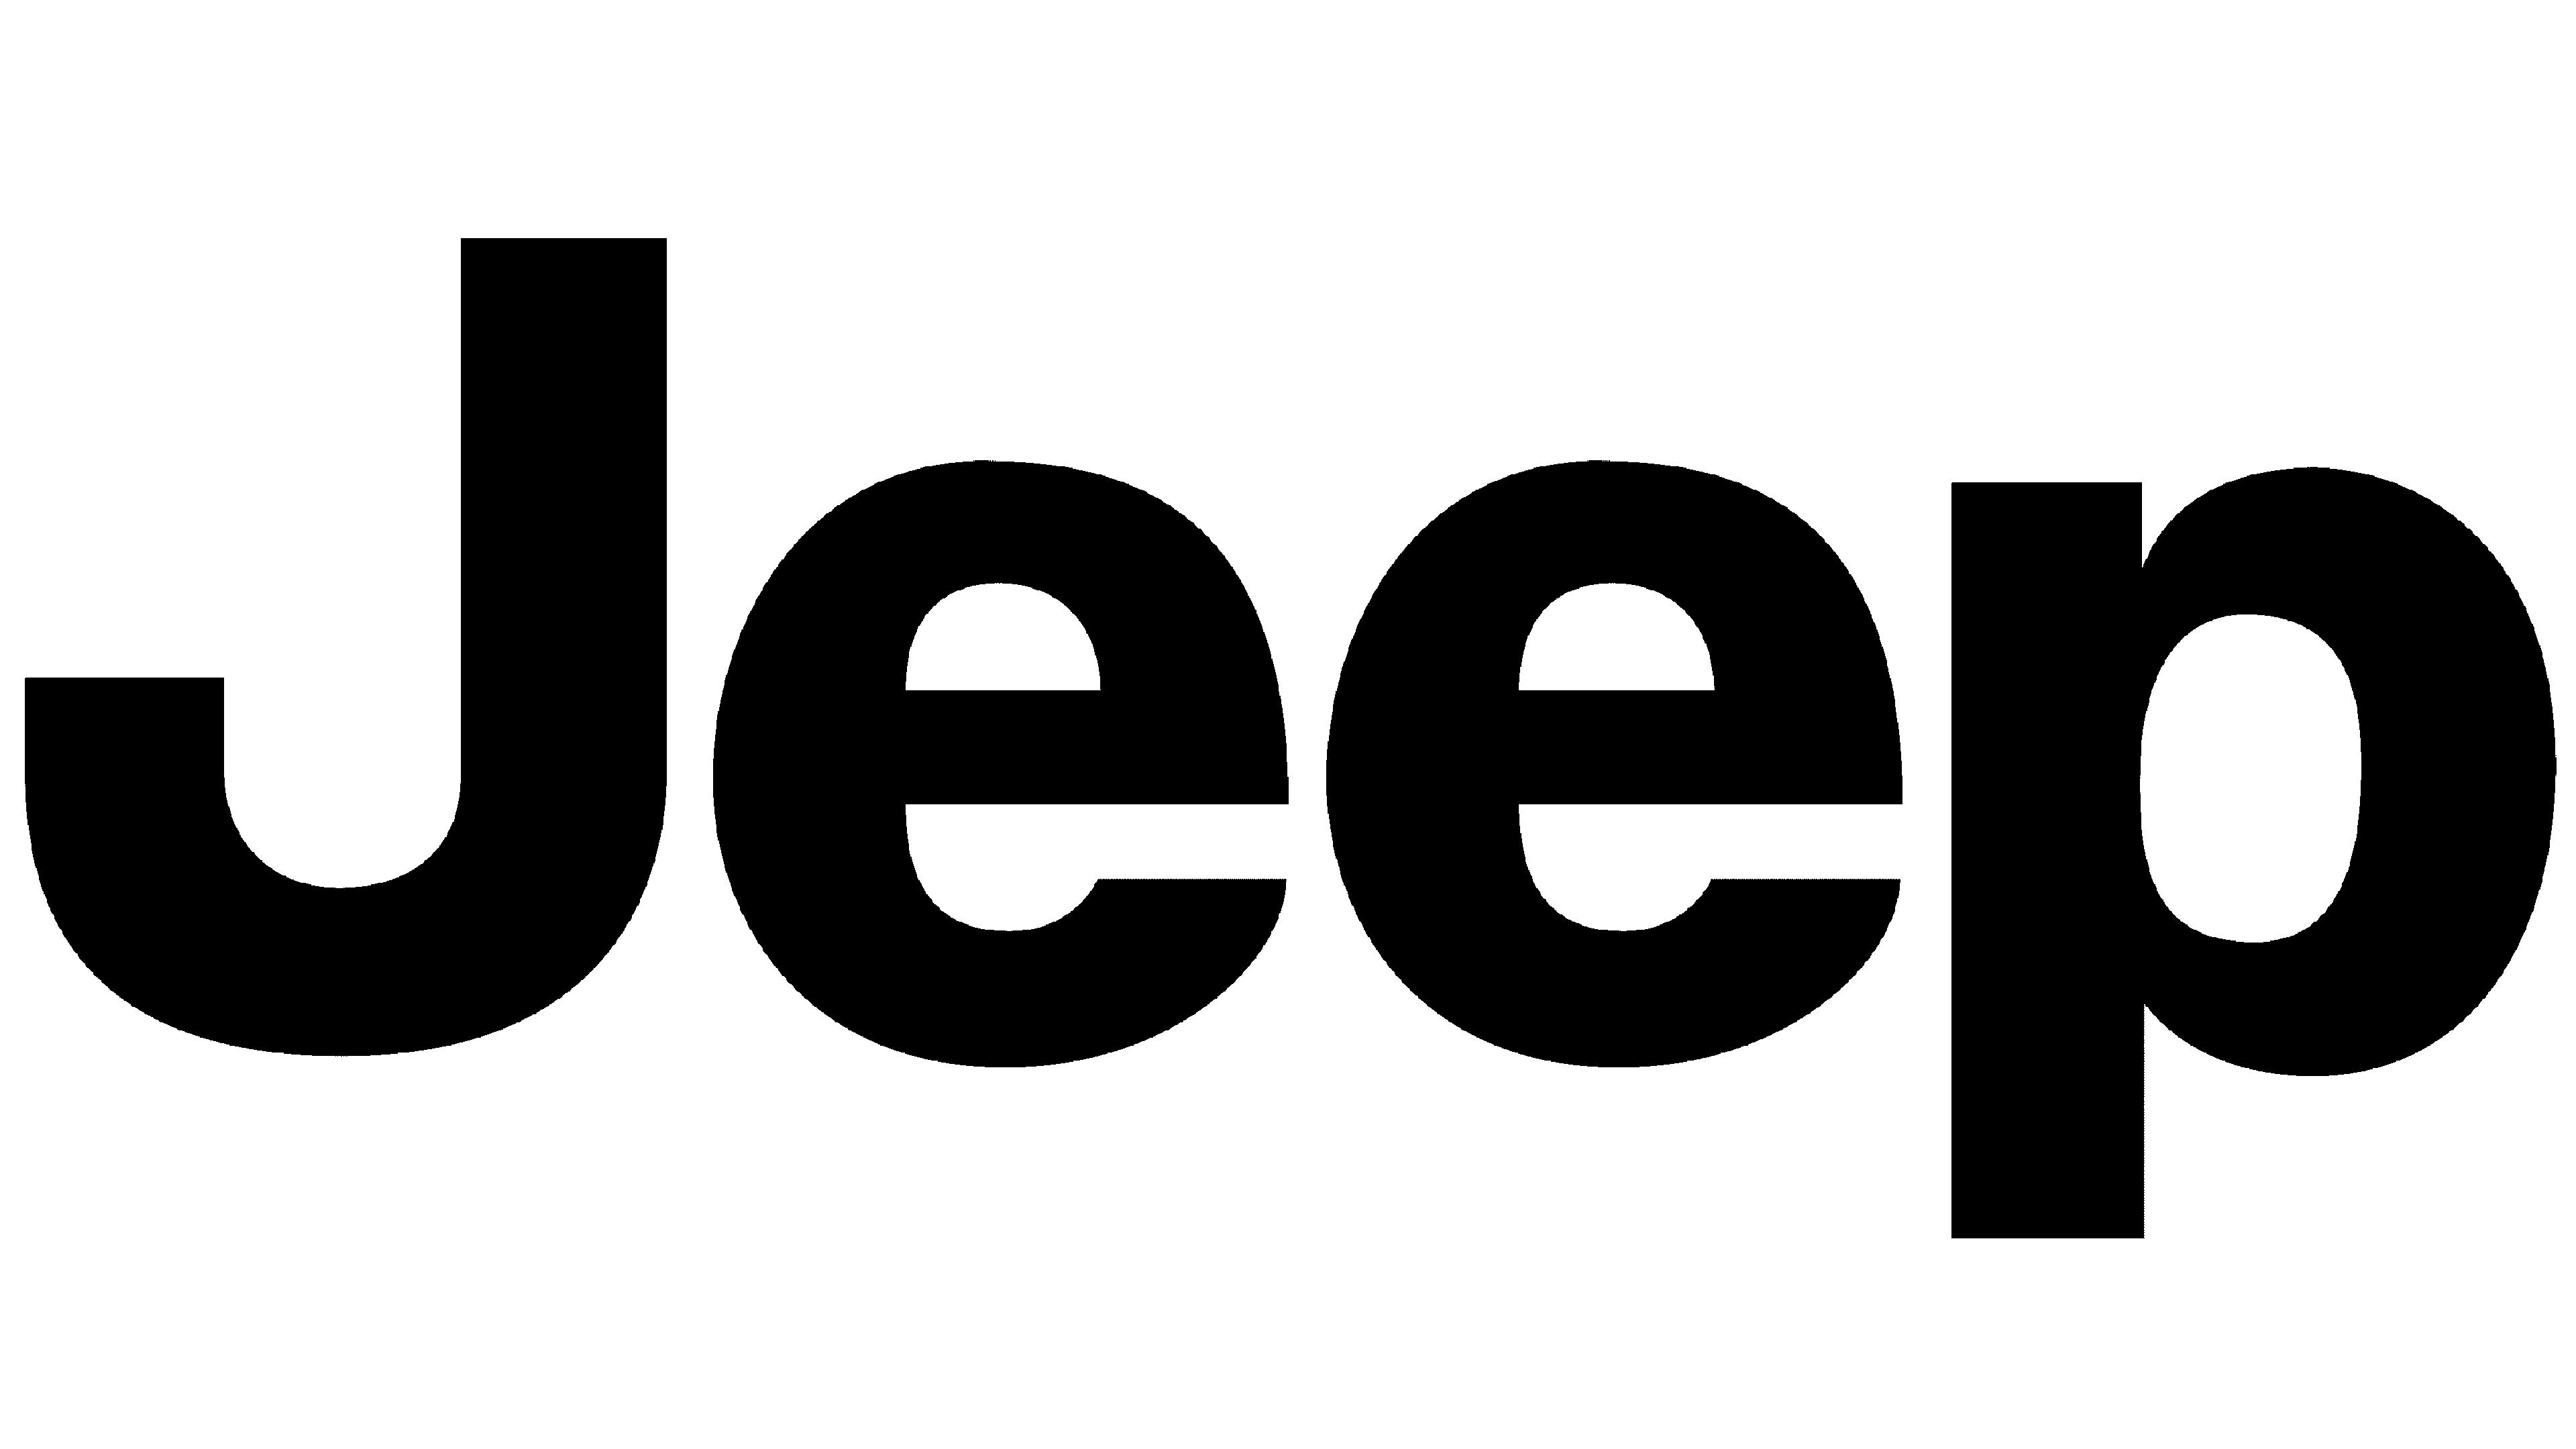 Jeep Logo Meaning and History [Jeep symbol]